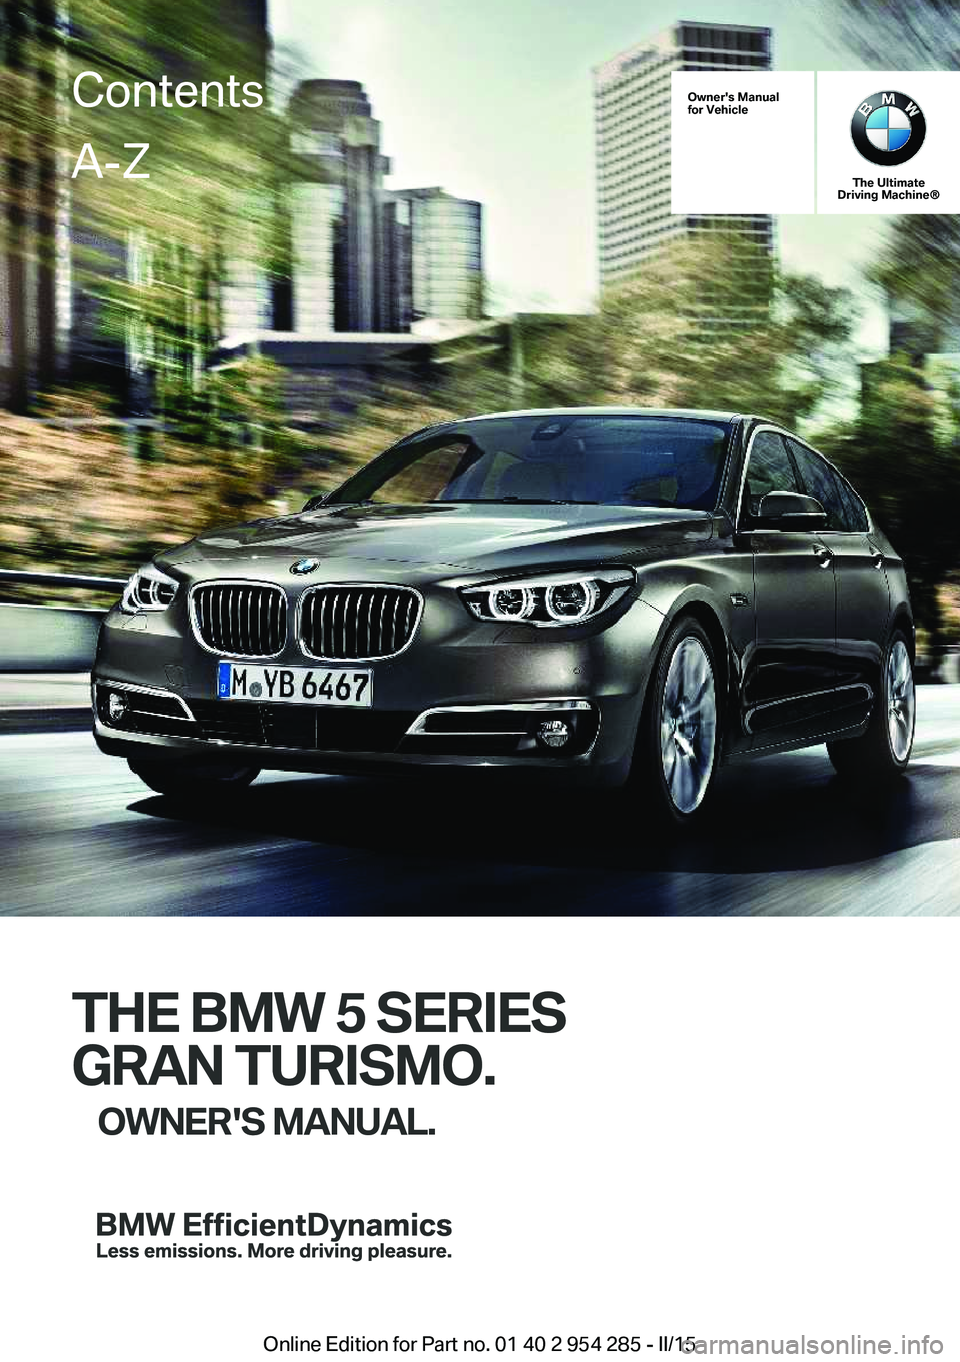 BMW 535I GRAN TURISMO 2015  Owners Manual Owner's Manual
for Vehicle
The Ultimate
Driving Machine®
THE BMW 5 SERIES
GRAN TURISMO. OWNER'S MANUAL.
ContentsA-Z
Online Edition for Part no. 01 40 2 954 285 - II/15   